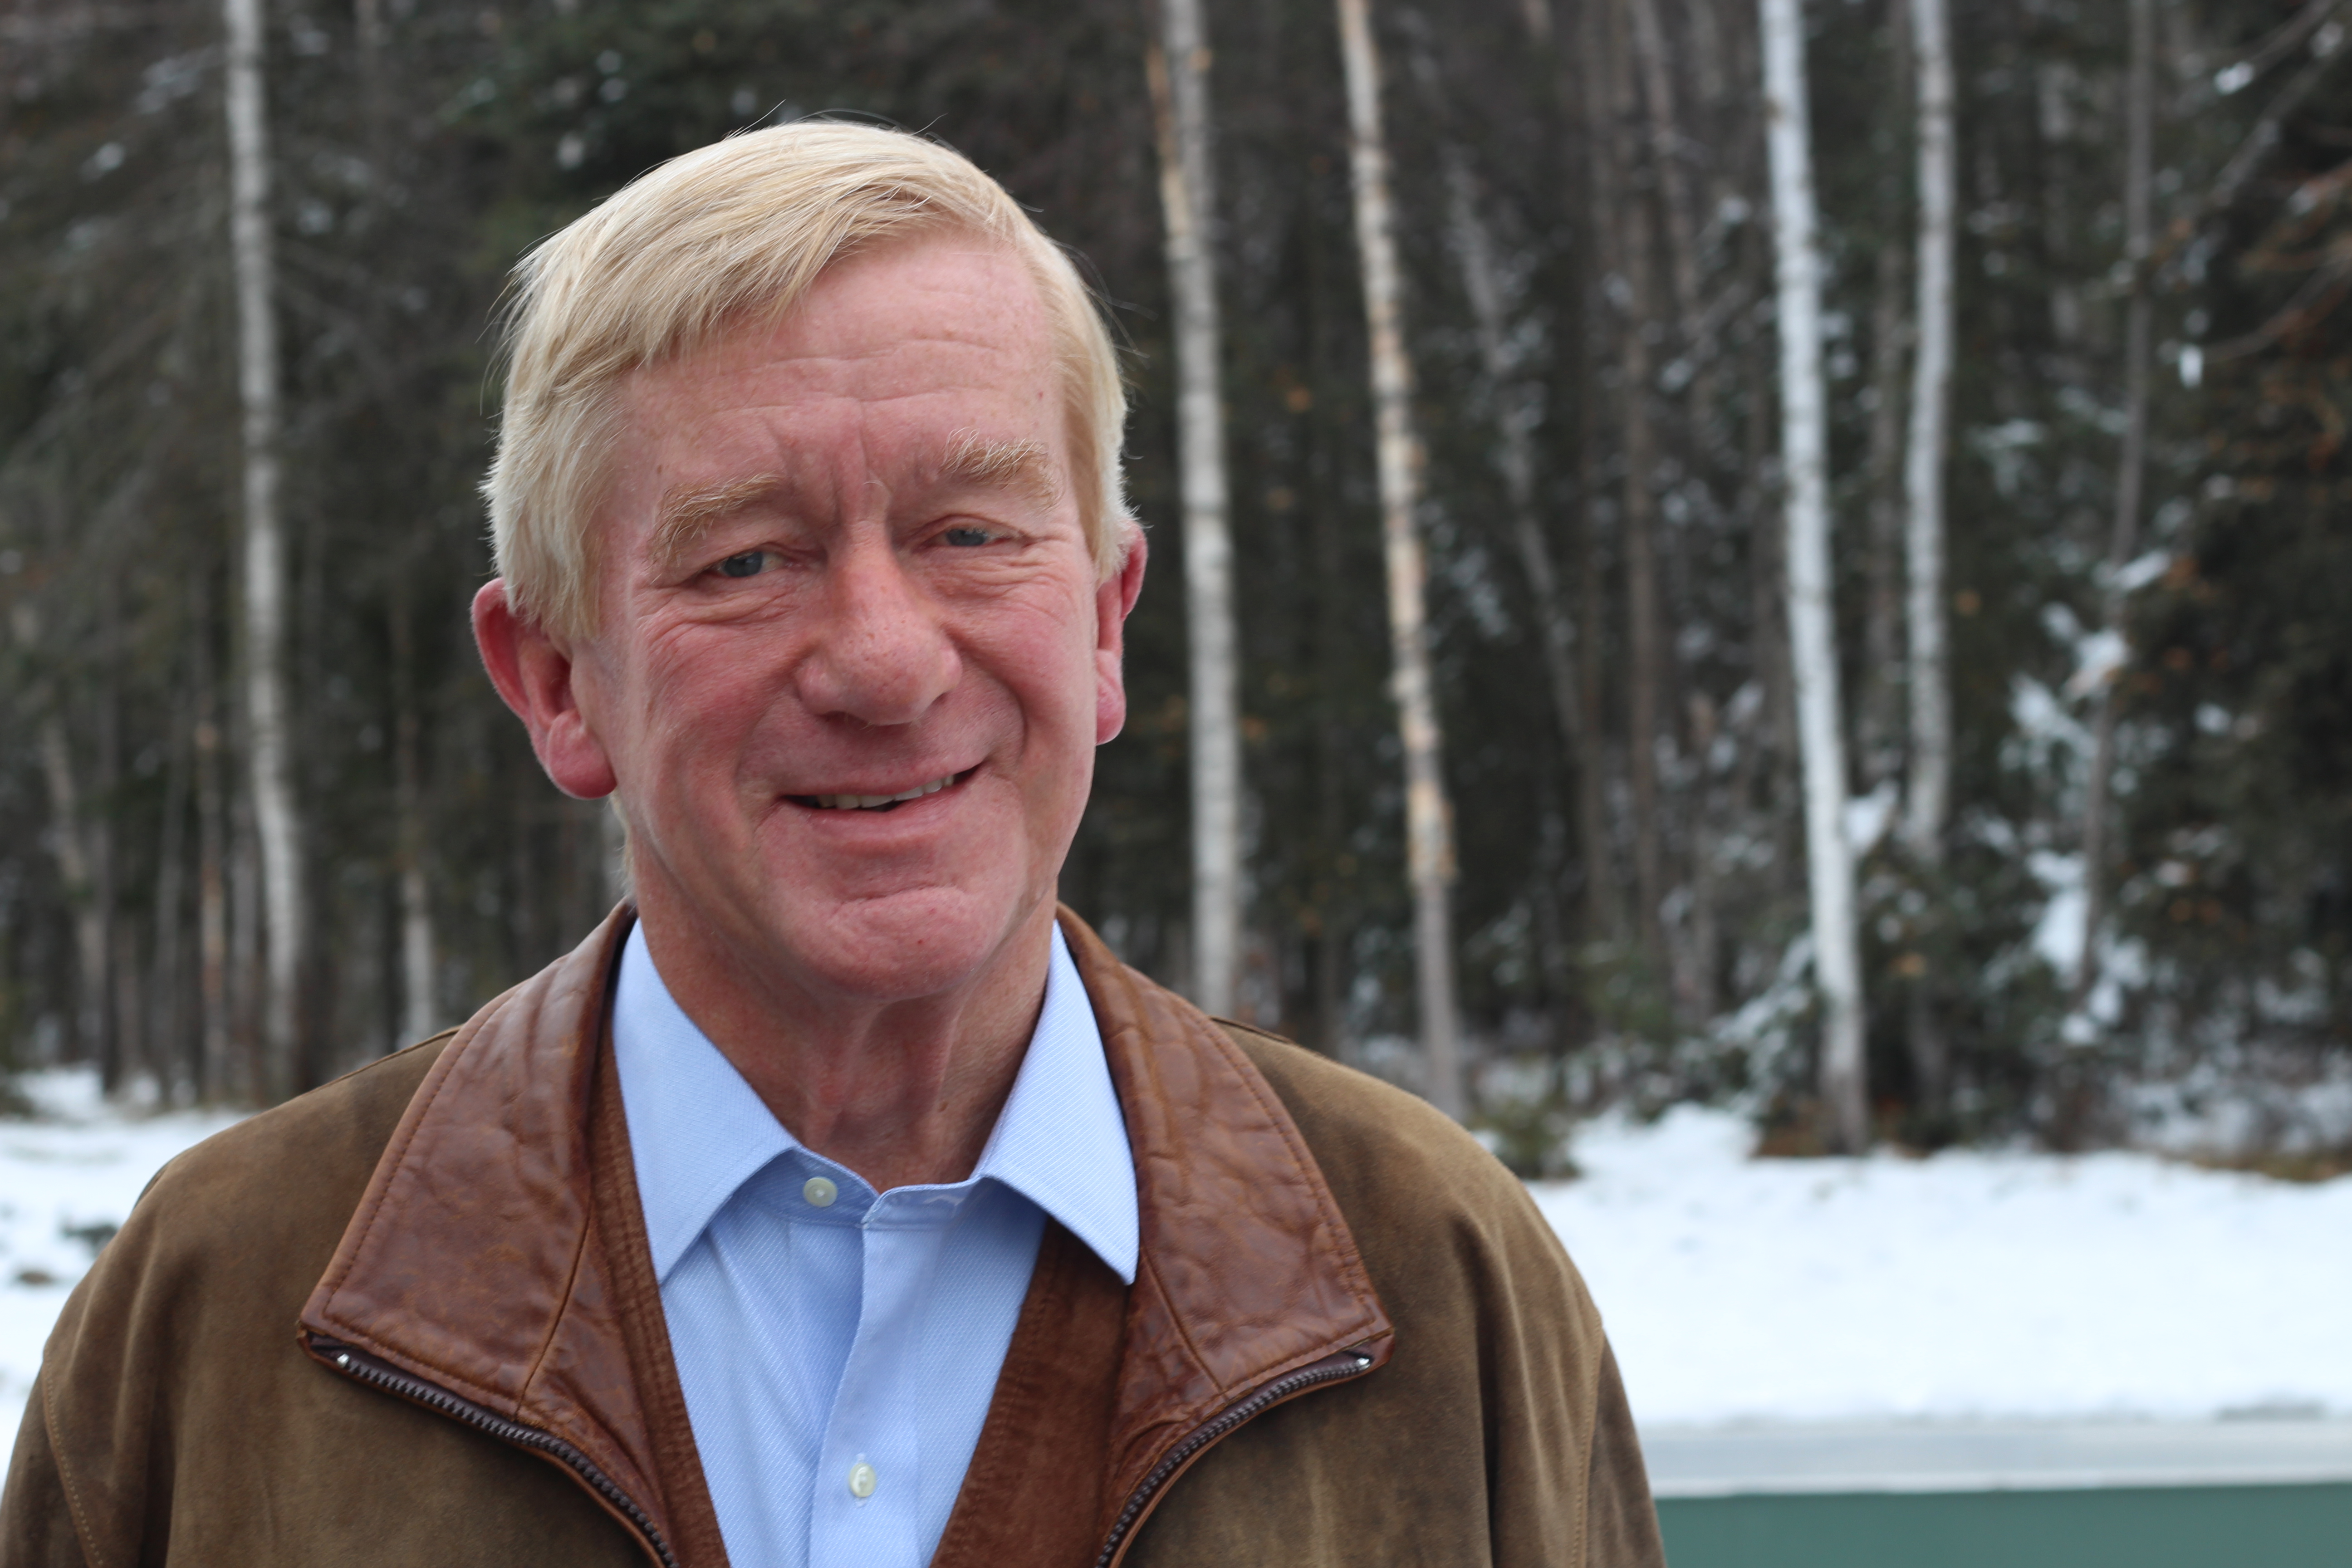 Bill Weld, former governor of Massachusetts, is the Libertarian Party's nominee for Vice President with running mate Gary Johnson. He stopped by Alaska Public Media to discuss his platform. (Photo by Wesley Early, Alaska Public Media -Anchorage)